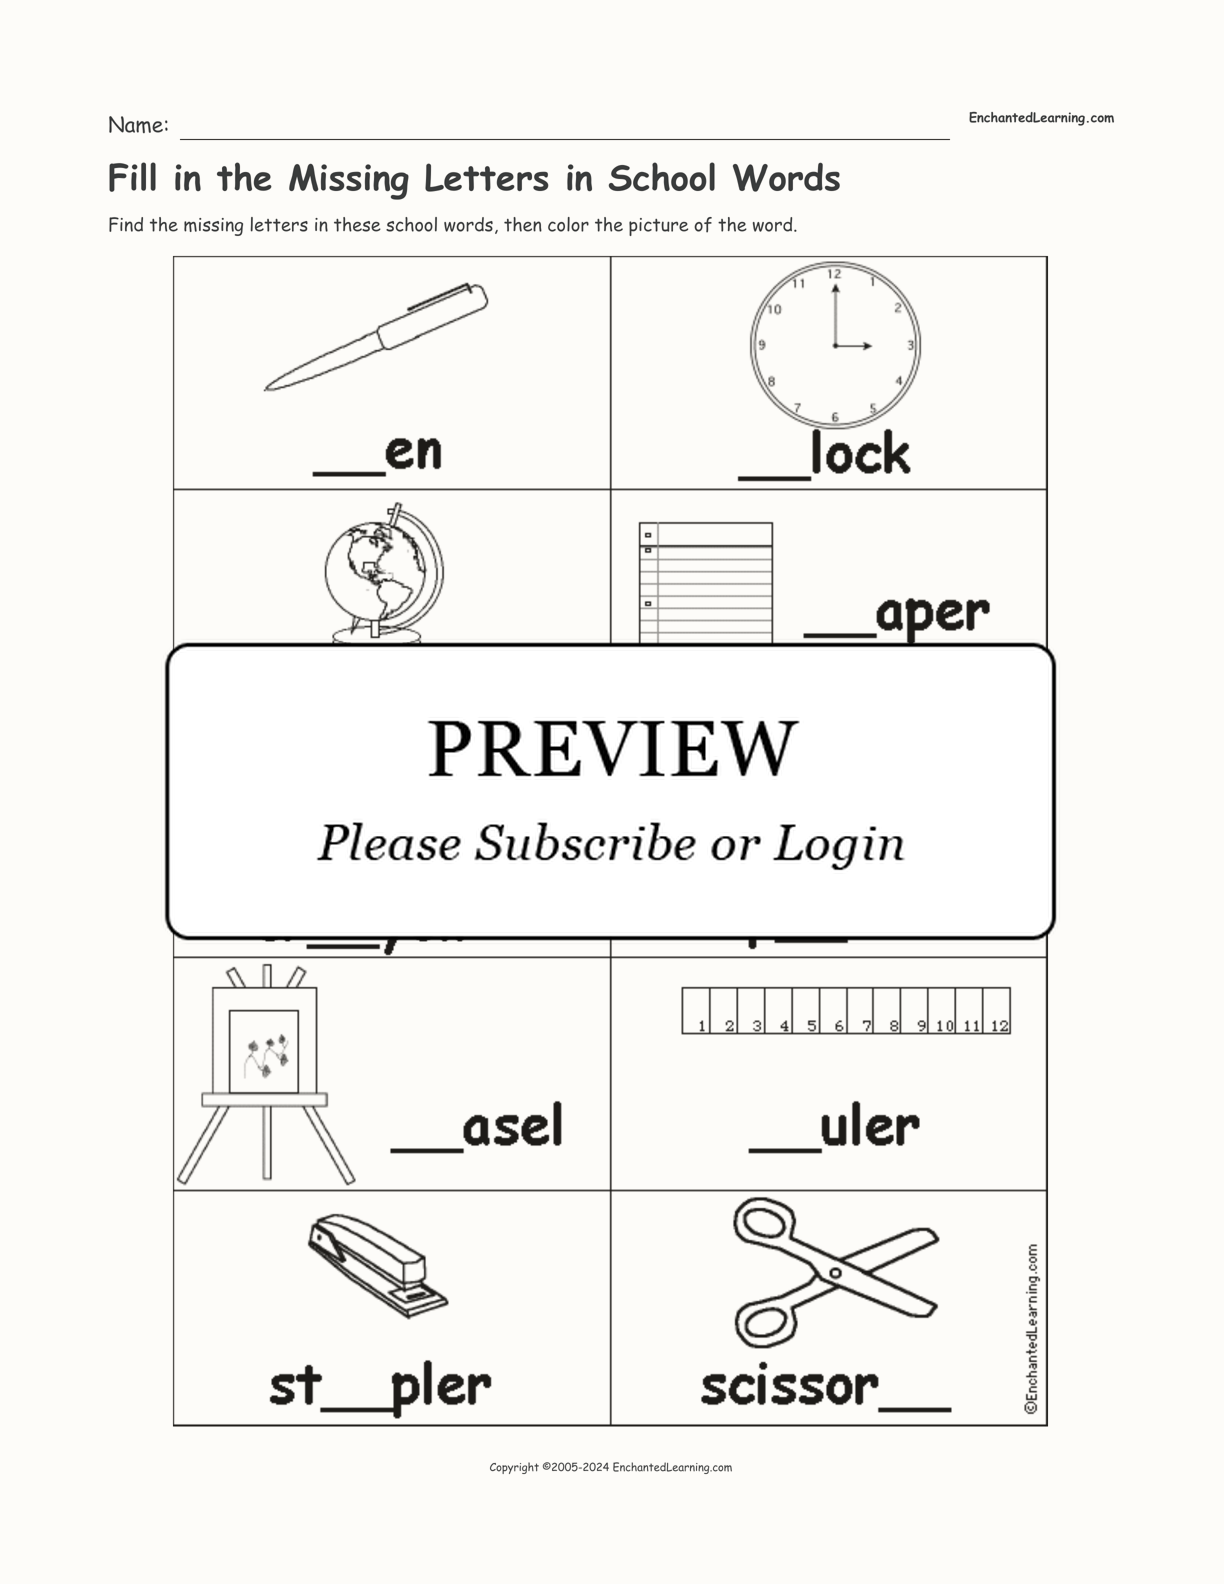 Fill in the Missing Letters in School Words interactive worksheet page 1